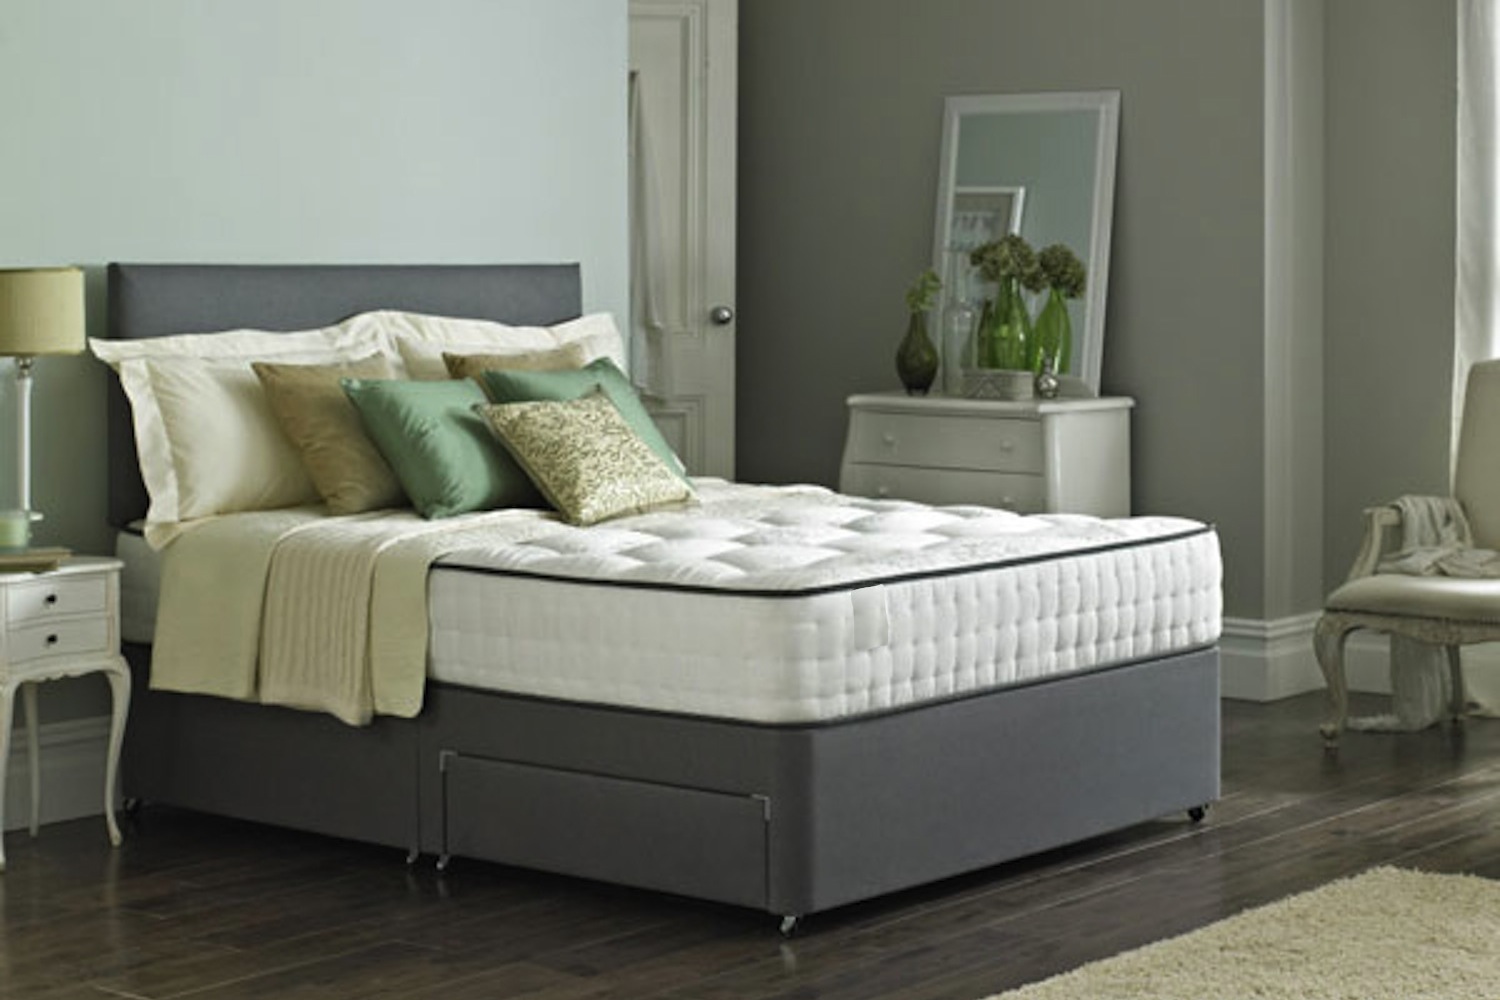 Royal Memory Foam Sprung Divan Bed-Small Single-End Opening Ottoman